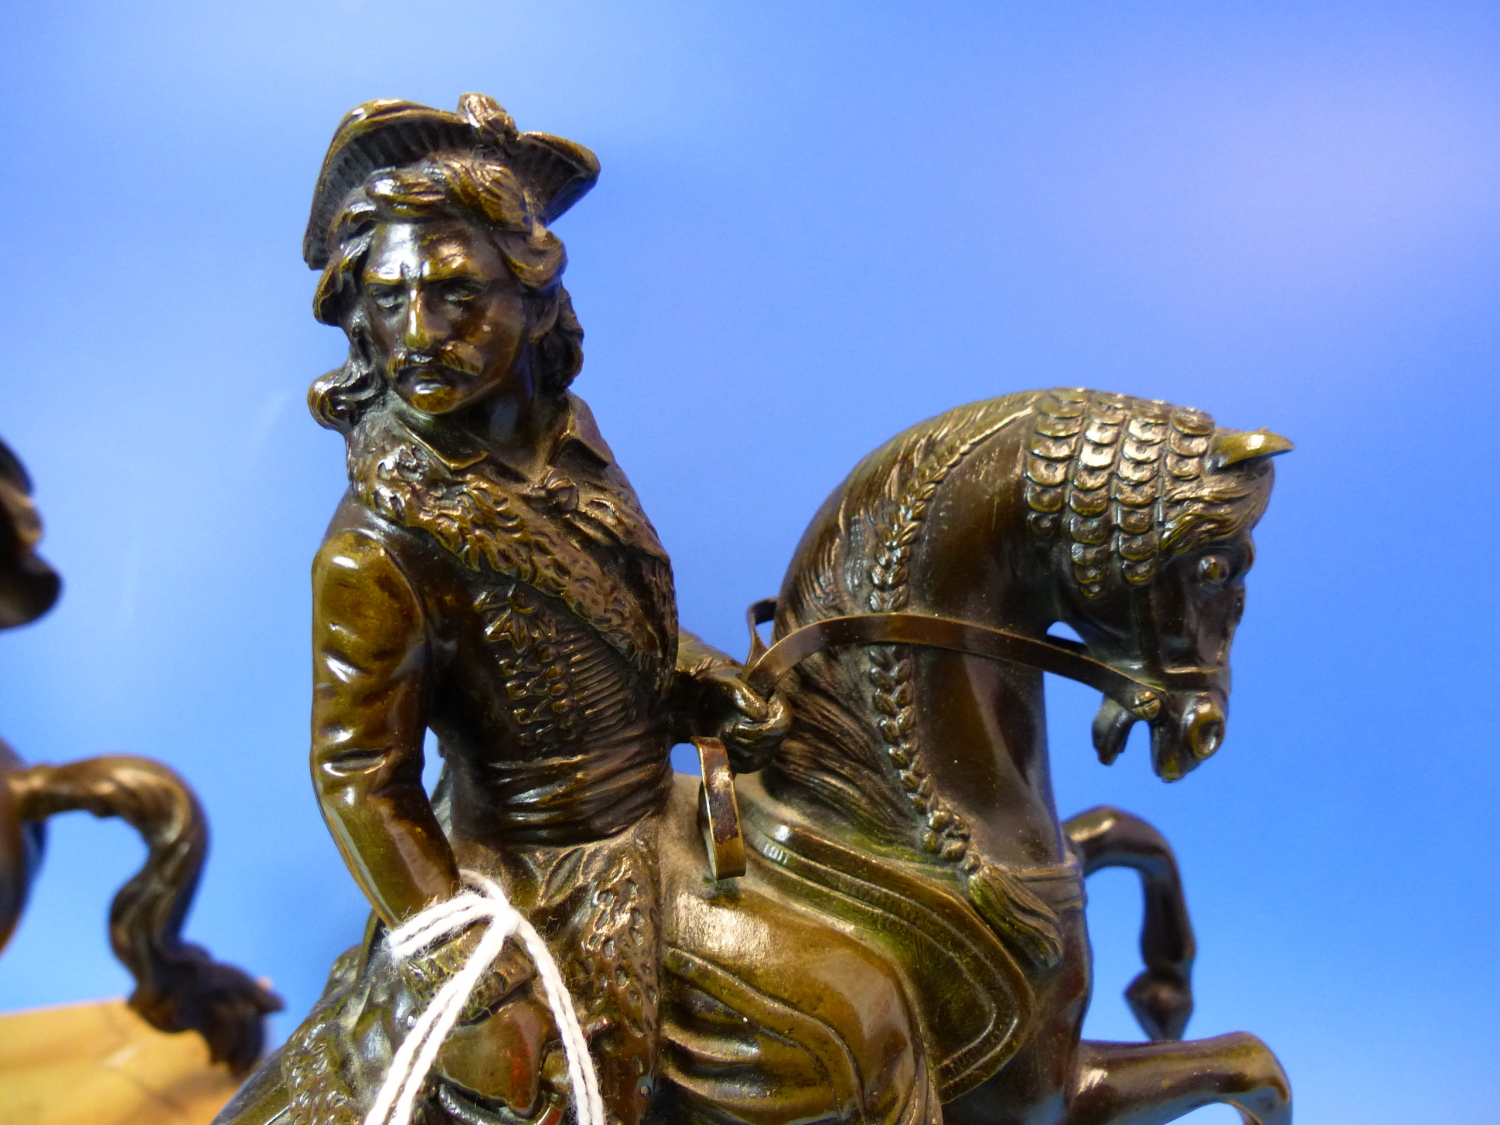 A PAIR OF 19th.CENTURY EQUESTRIAN BRONZES OF A COSSACK AND A ROMAN SOLDIER, THEIR HORSES REARING ON - Image 9 of 20